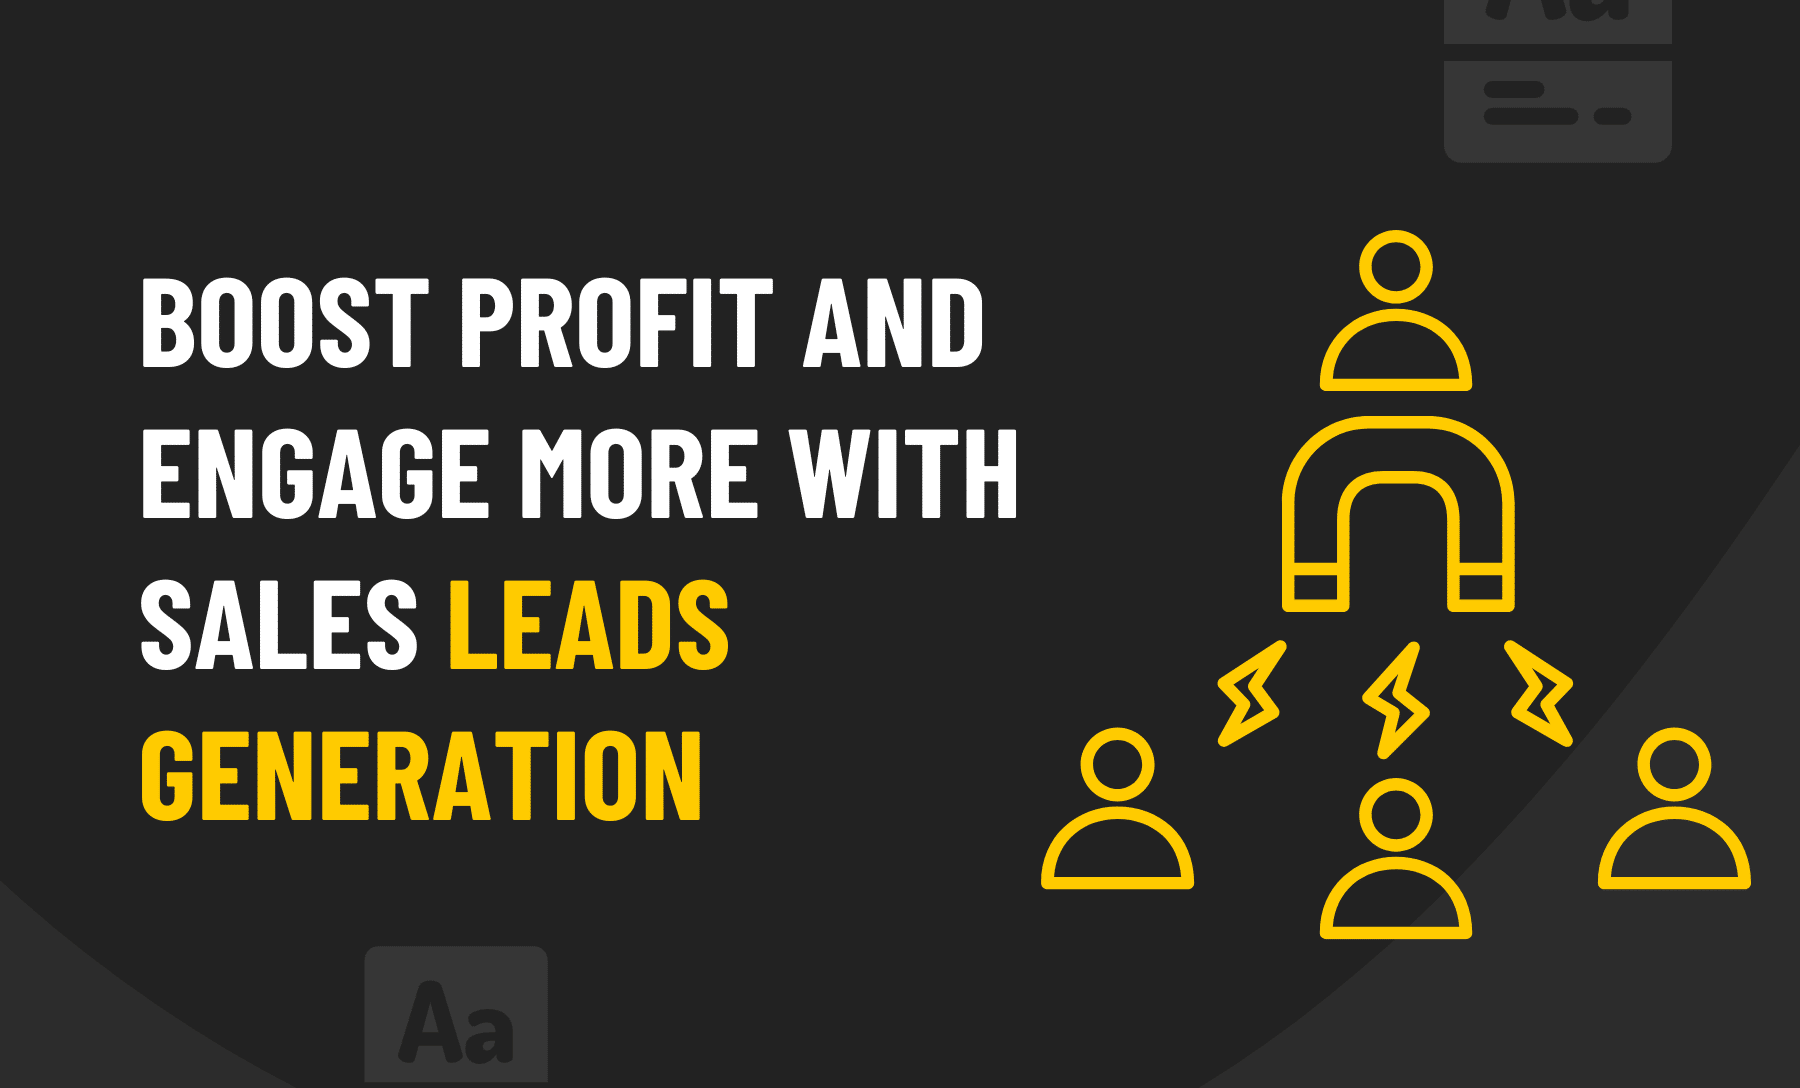 Boost profit and engage more with sales leads generation